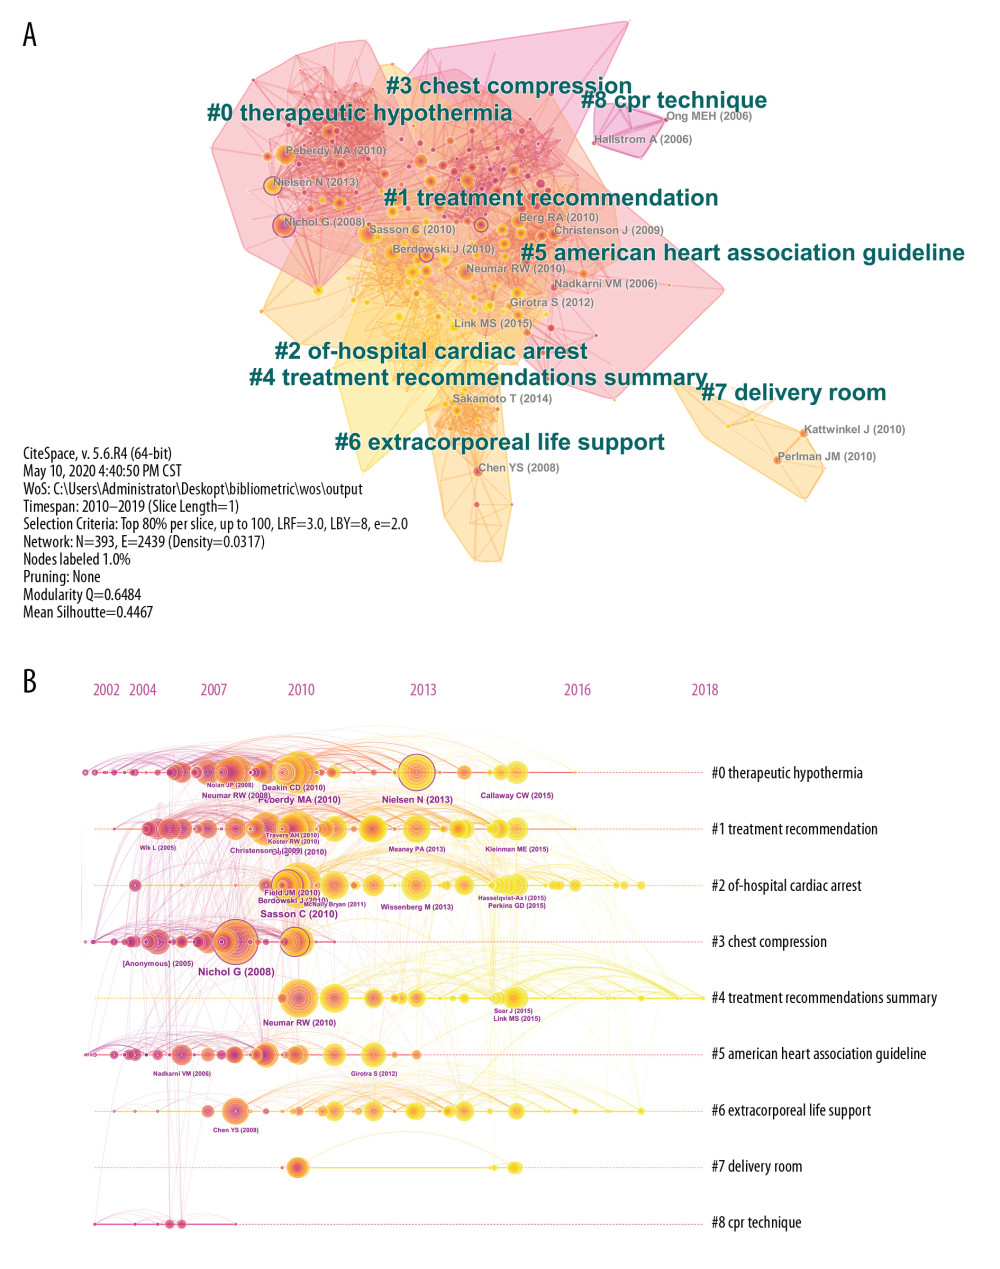 The clustered network map of co-cited references on cardiopulmonary resuscitation research (A) and the timeline view of co-citation clusters with their cluster labels on the right (B).